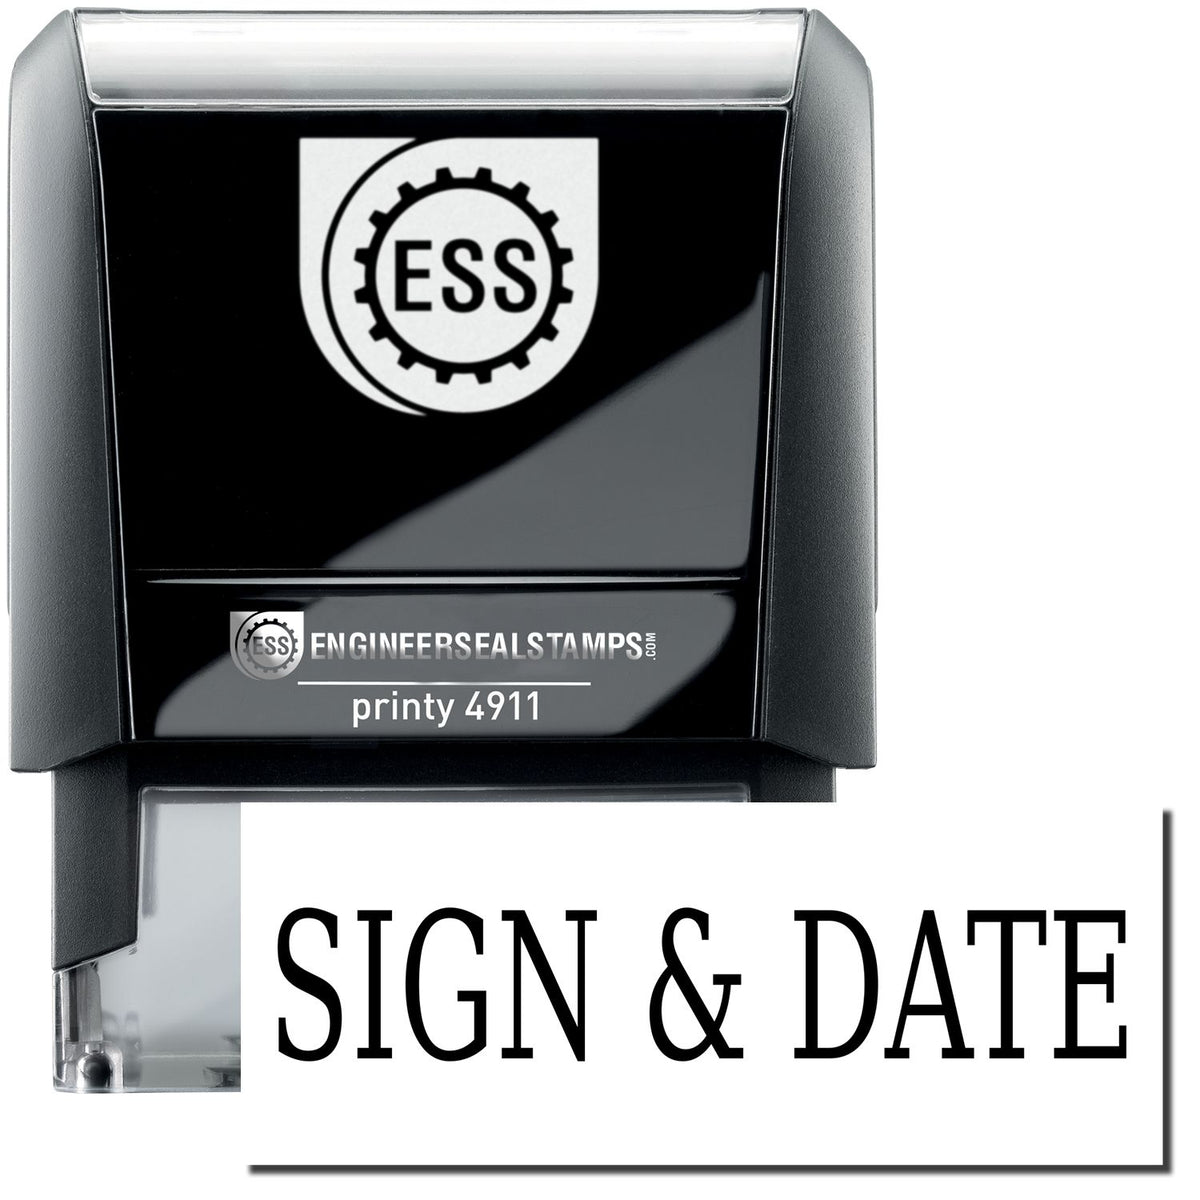 A self-inking stamp with a stamped image showing how the text &quot;SIGN &amp; DATE&quot; is displayed after stamping.